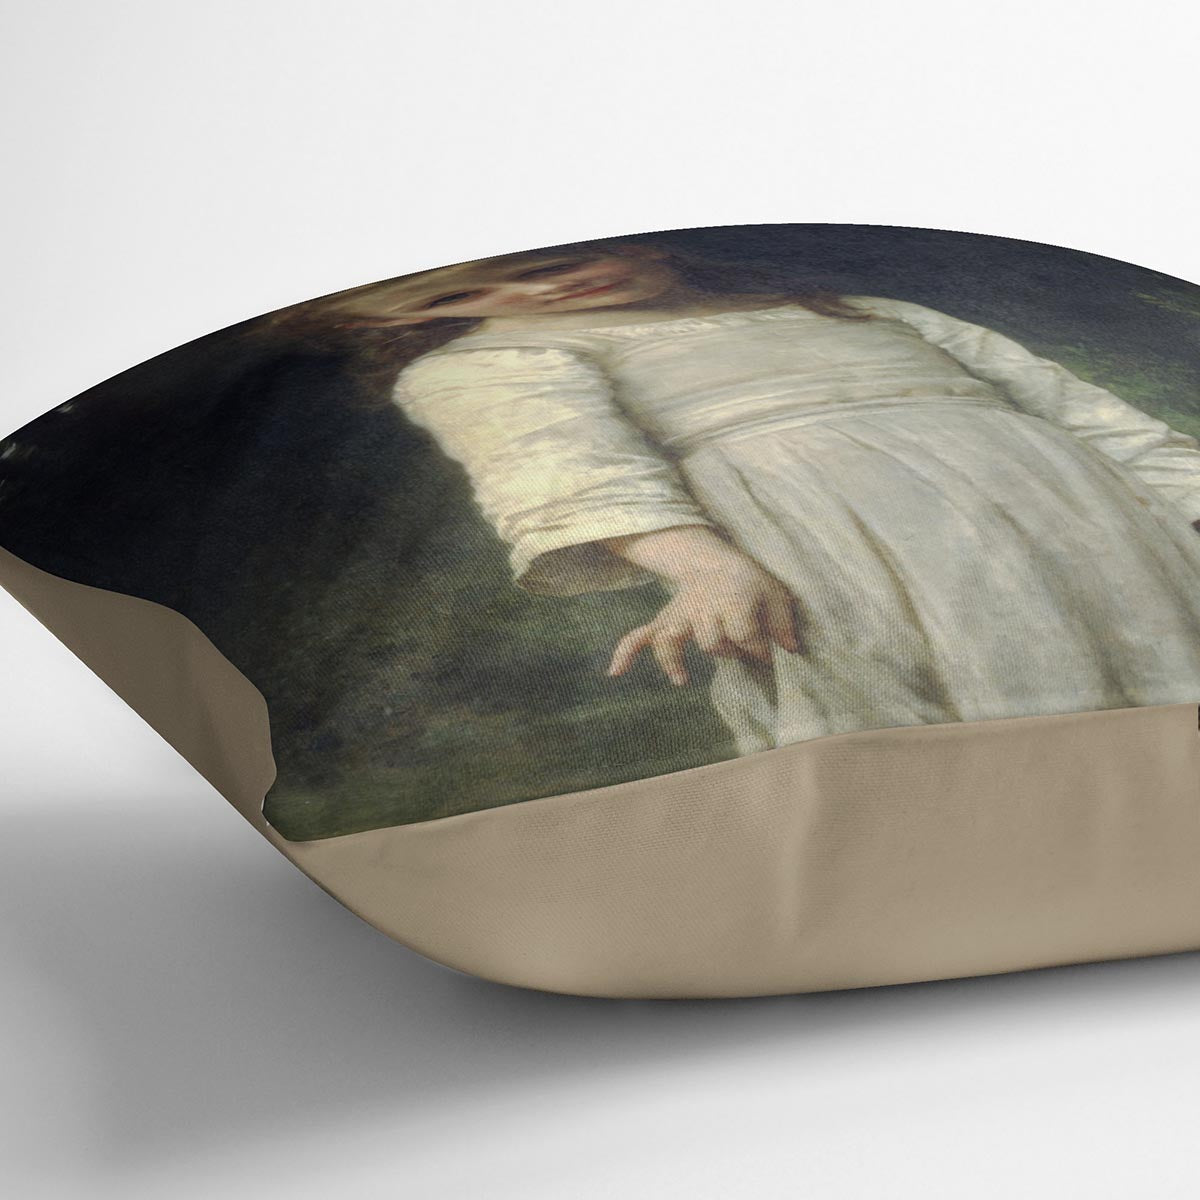 The Curtsey By Bouguereau Cushion